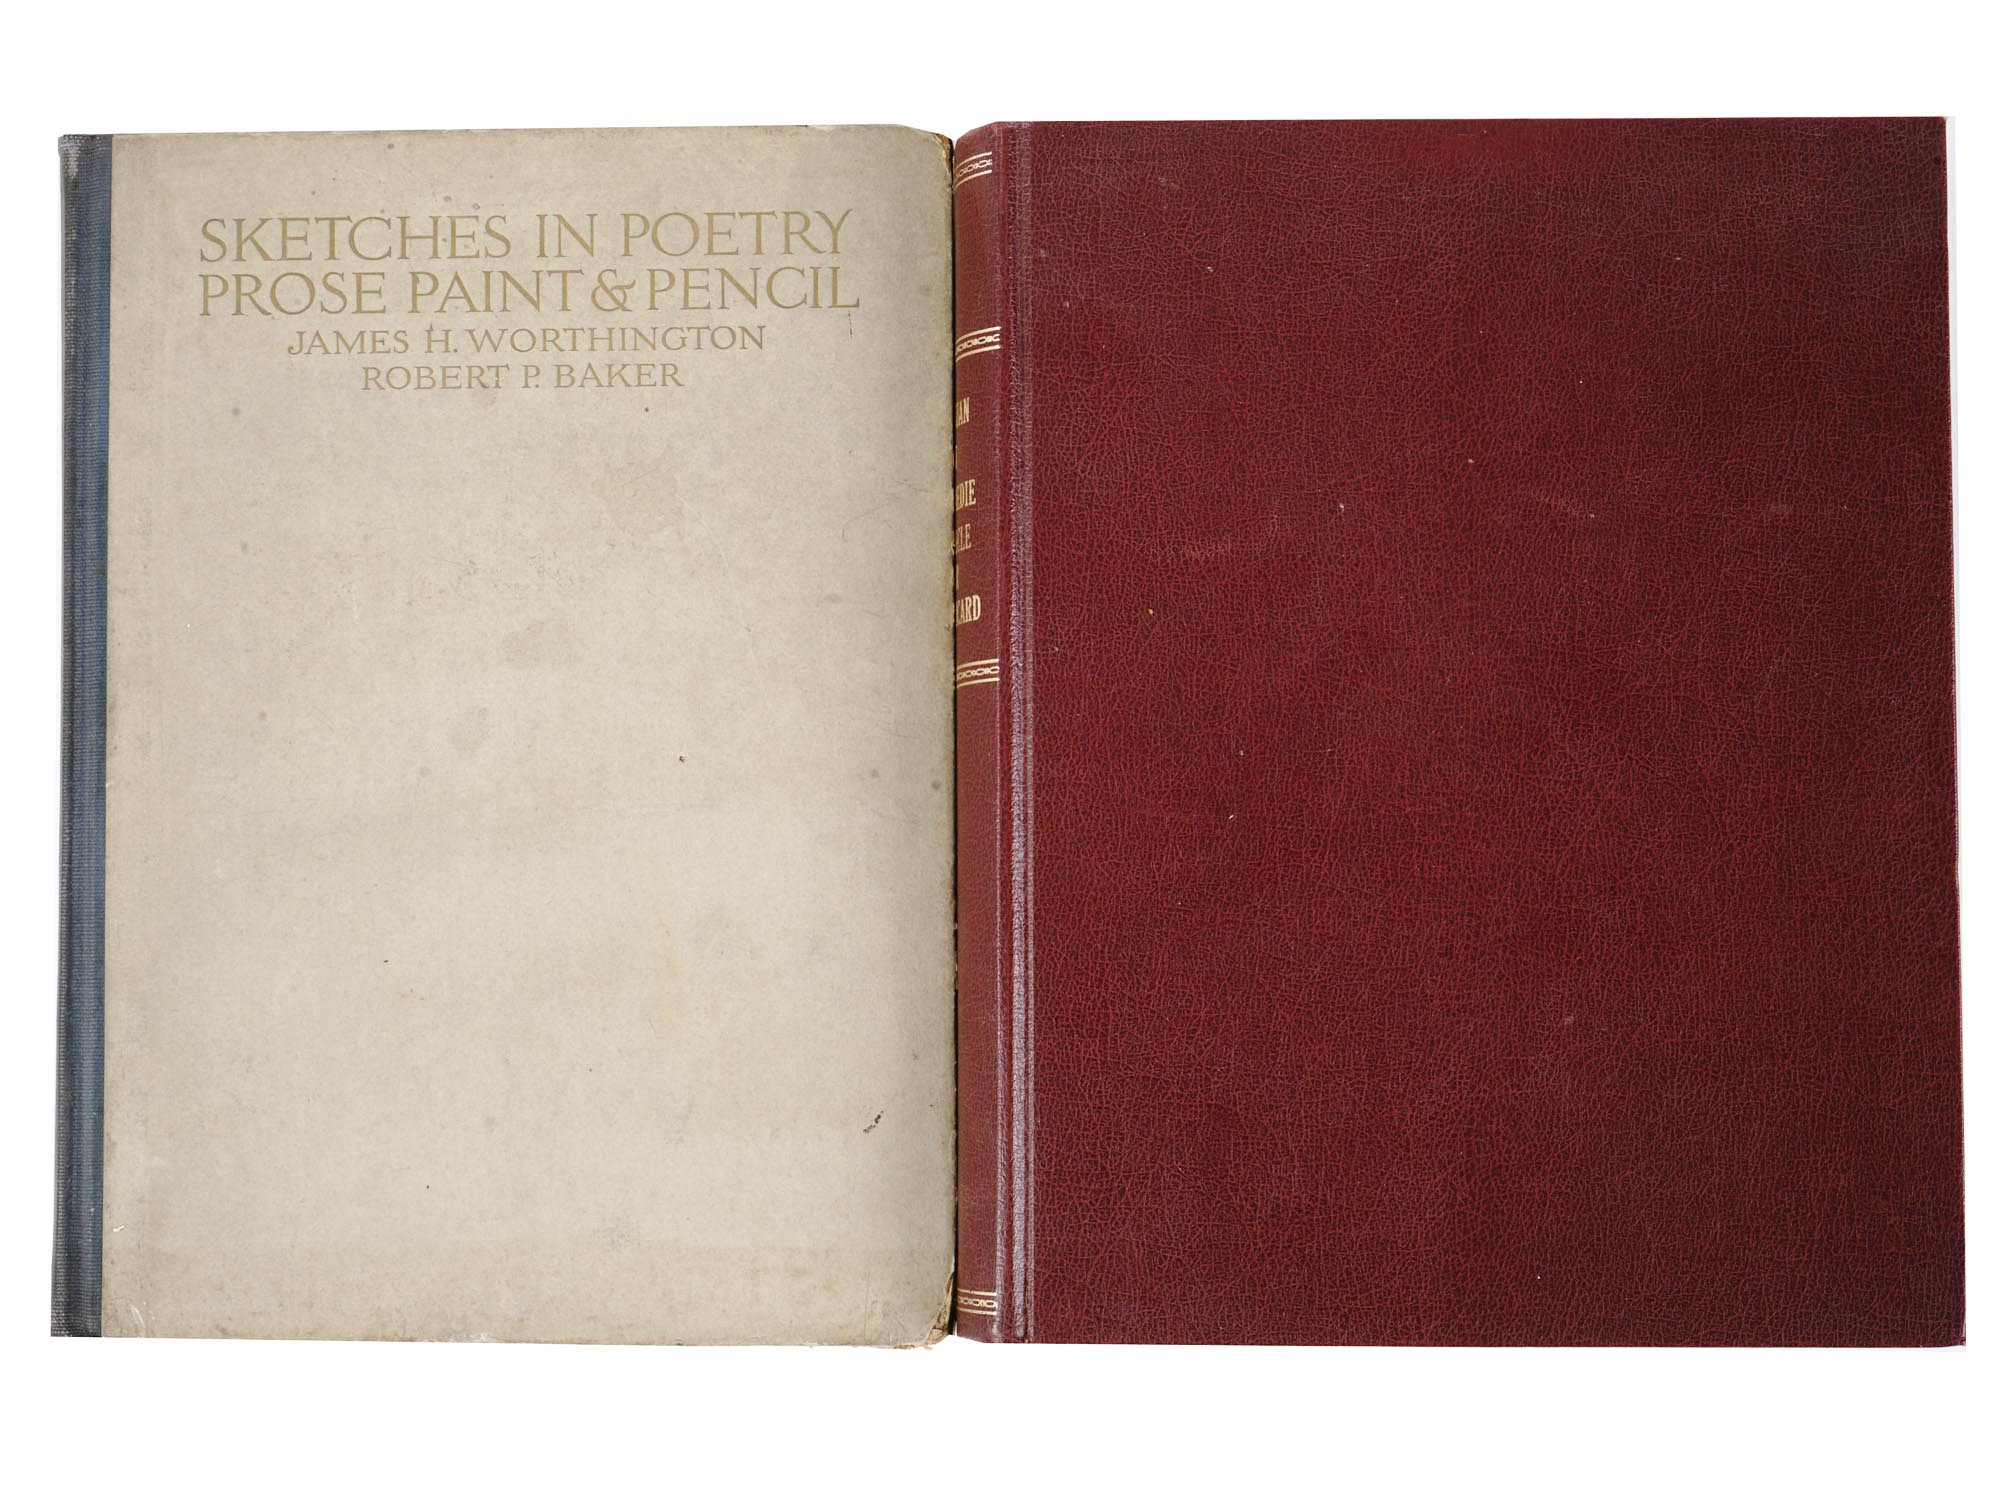 ANTIQUE LIMITED EDITION BOOKS WITH AUTOGRAPHS